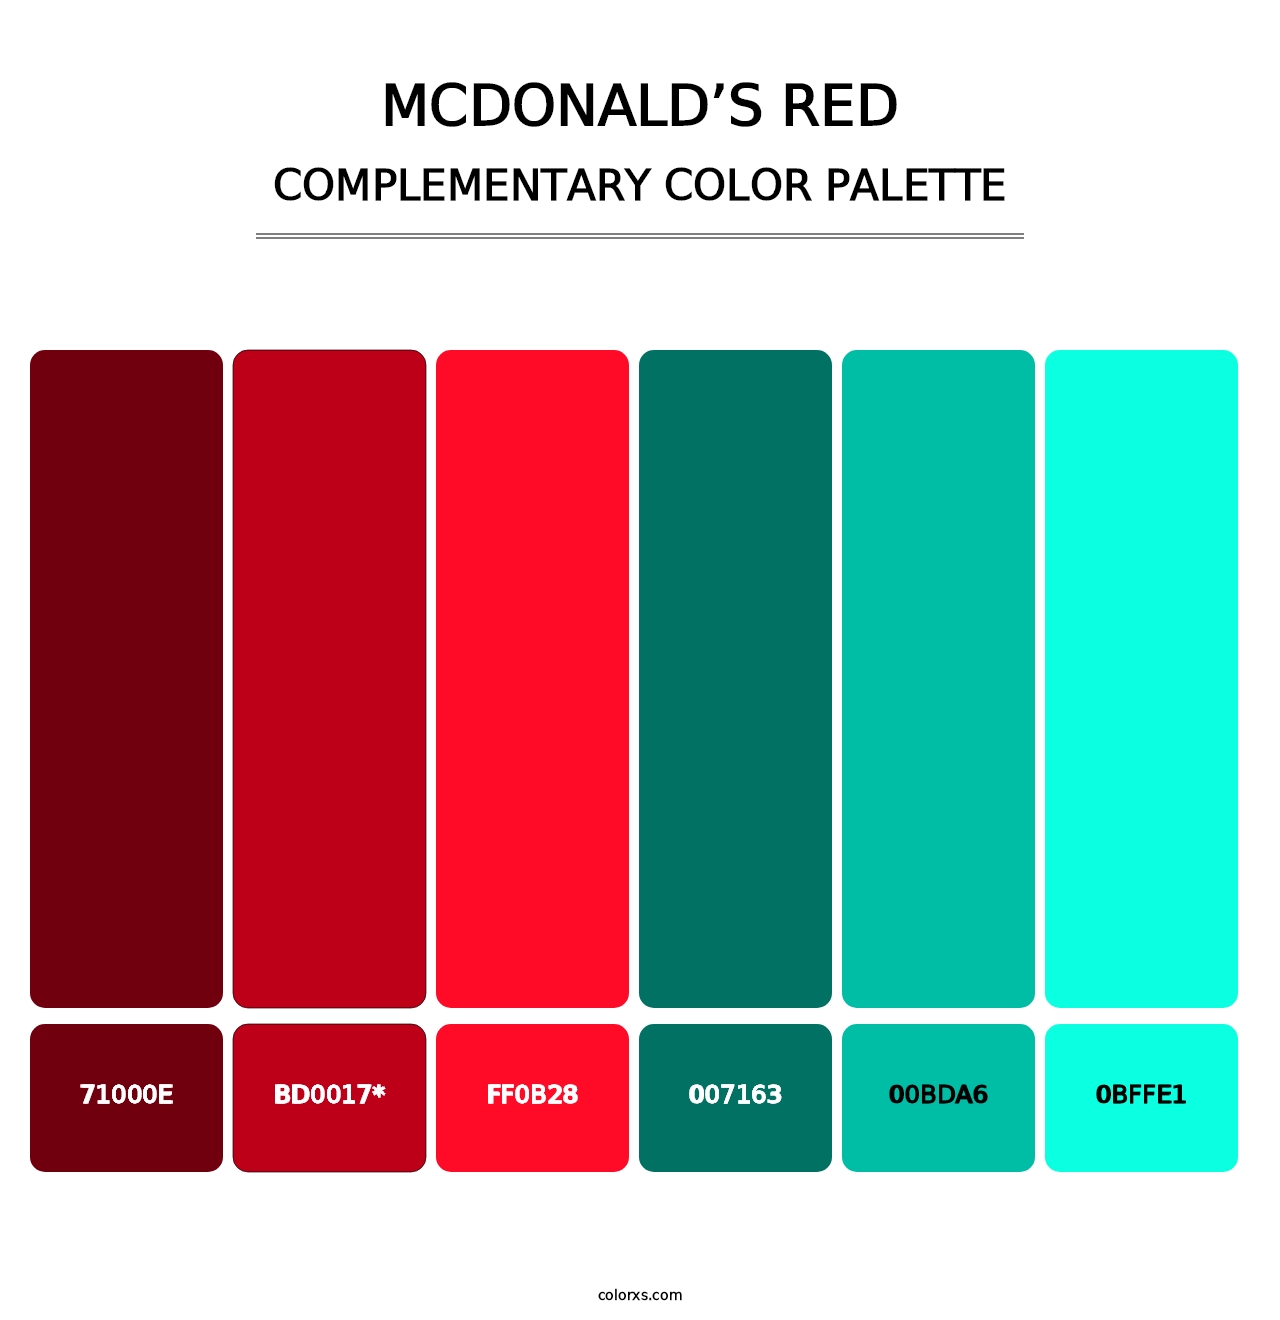 McDonald’s Red - Complementary Color Palette